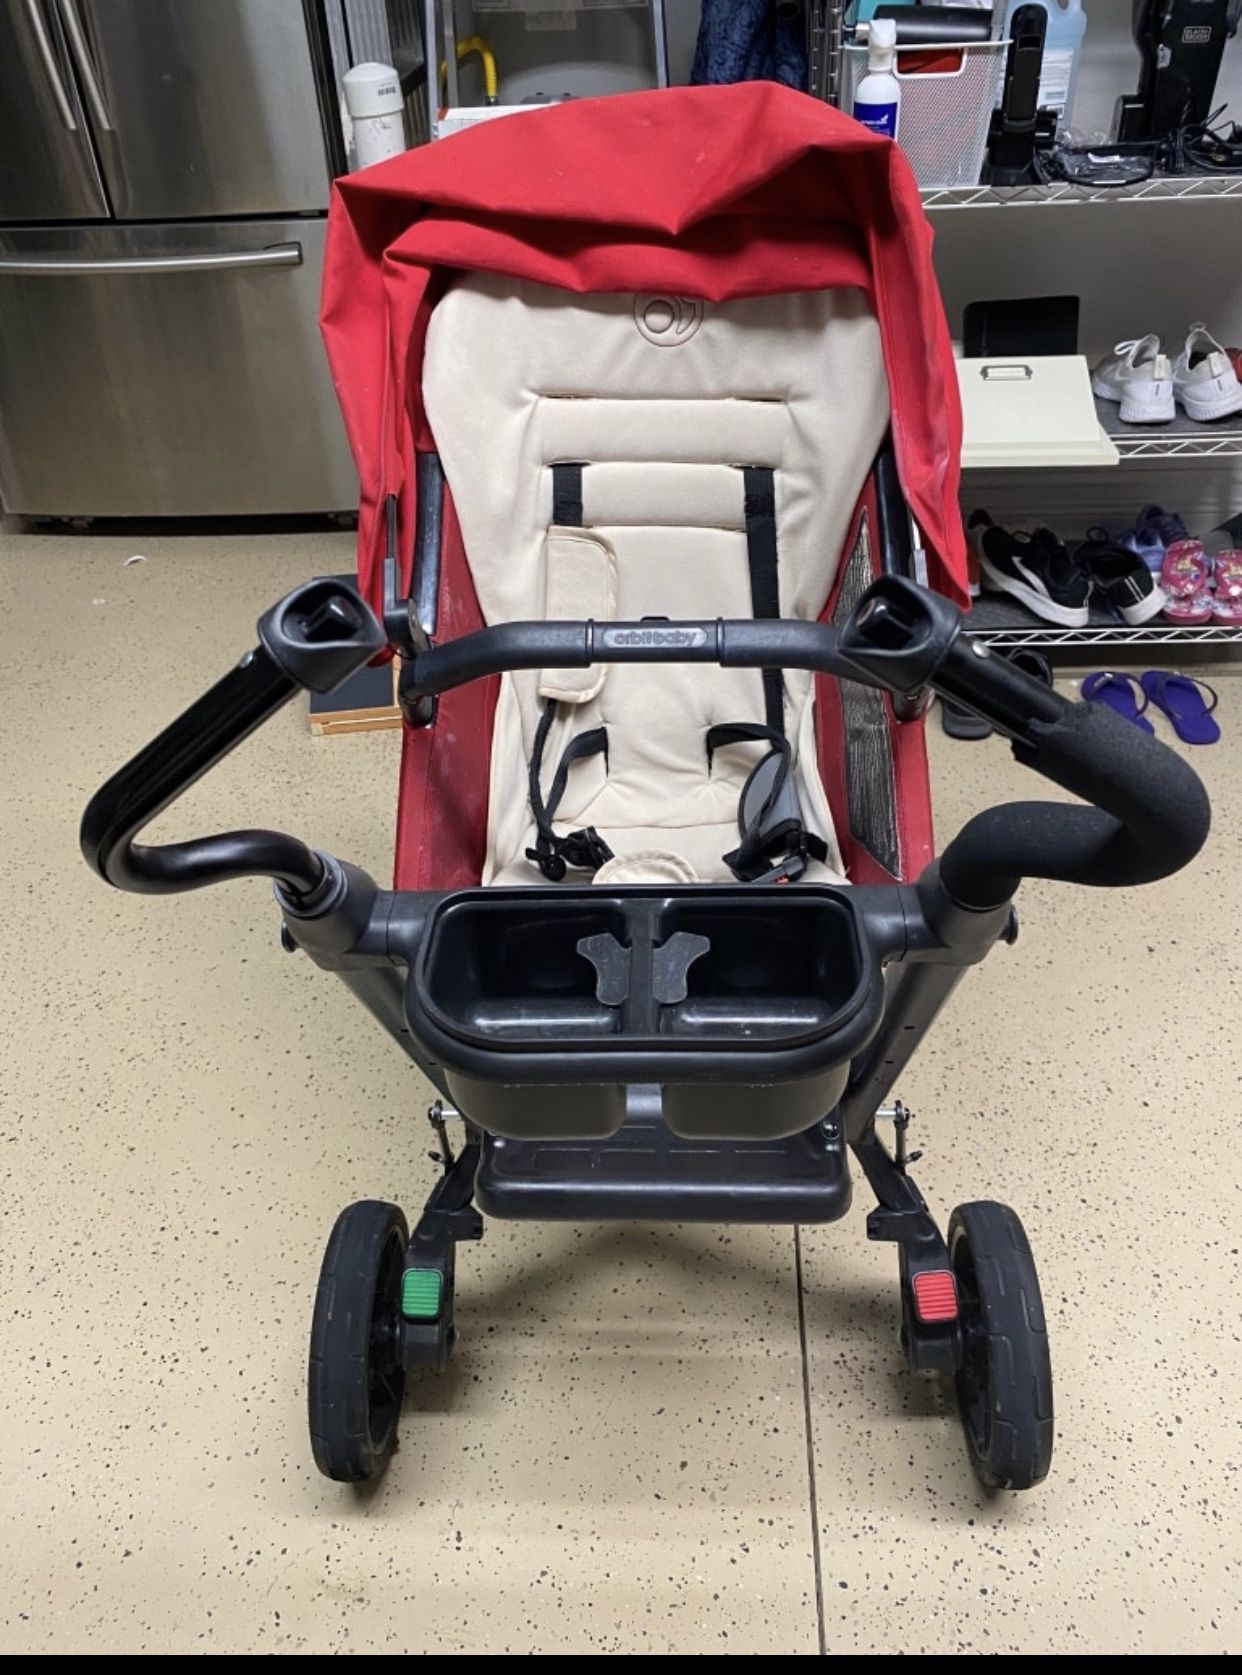 Orbit Baby Stroller - Red - Car seat included